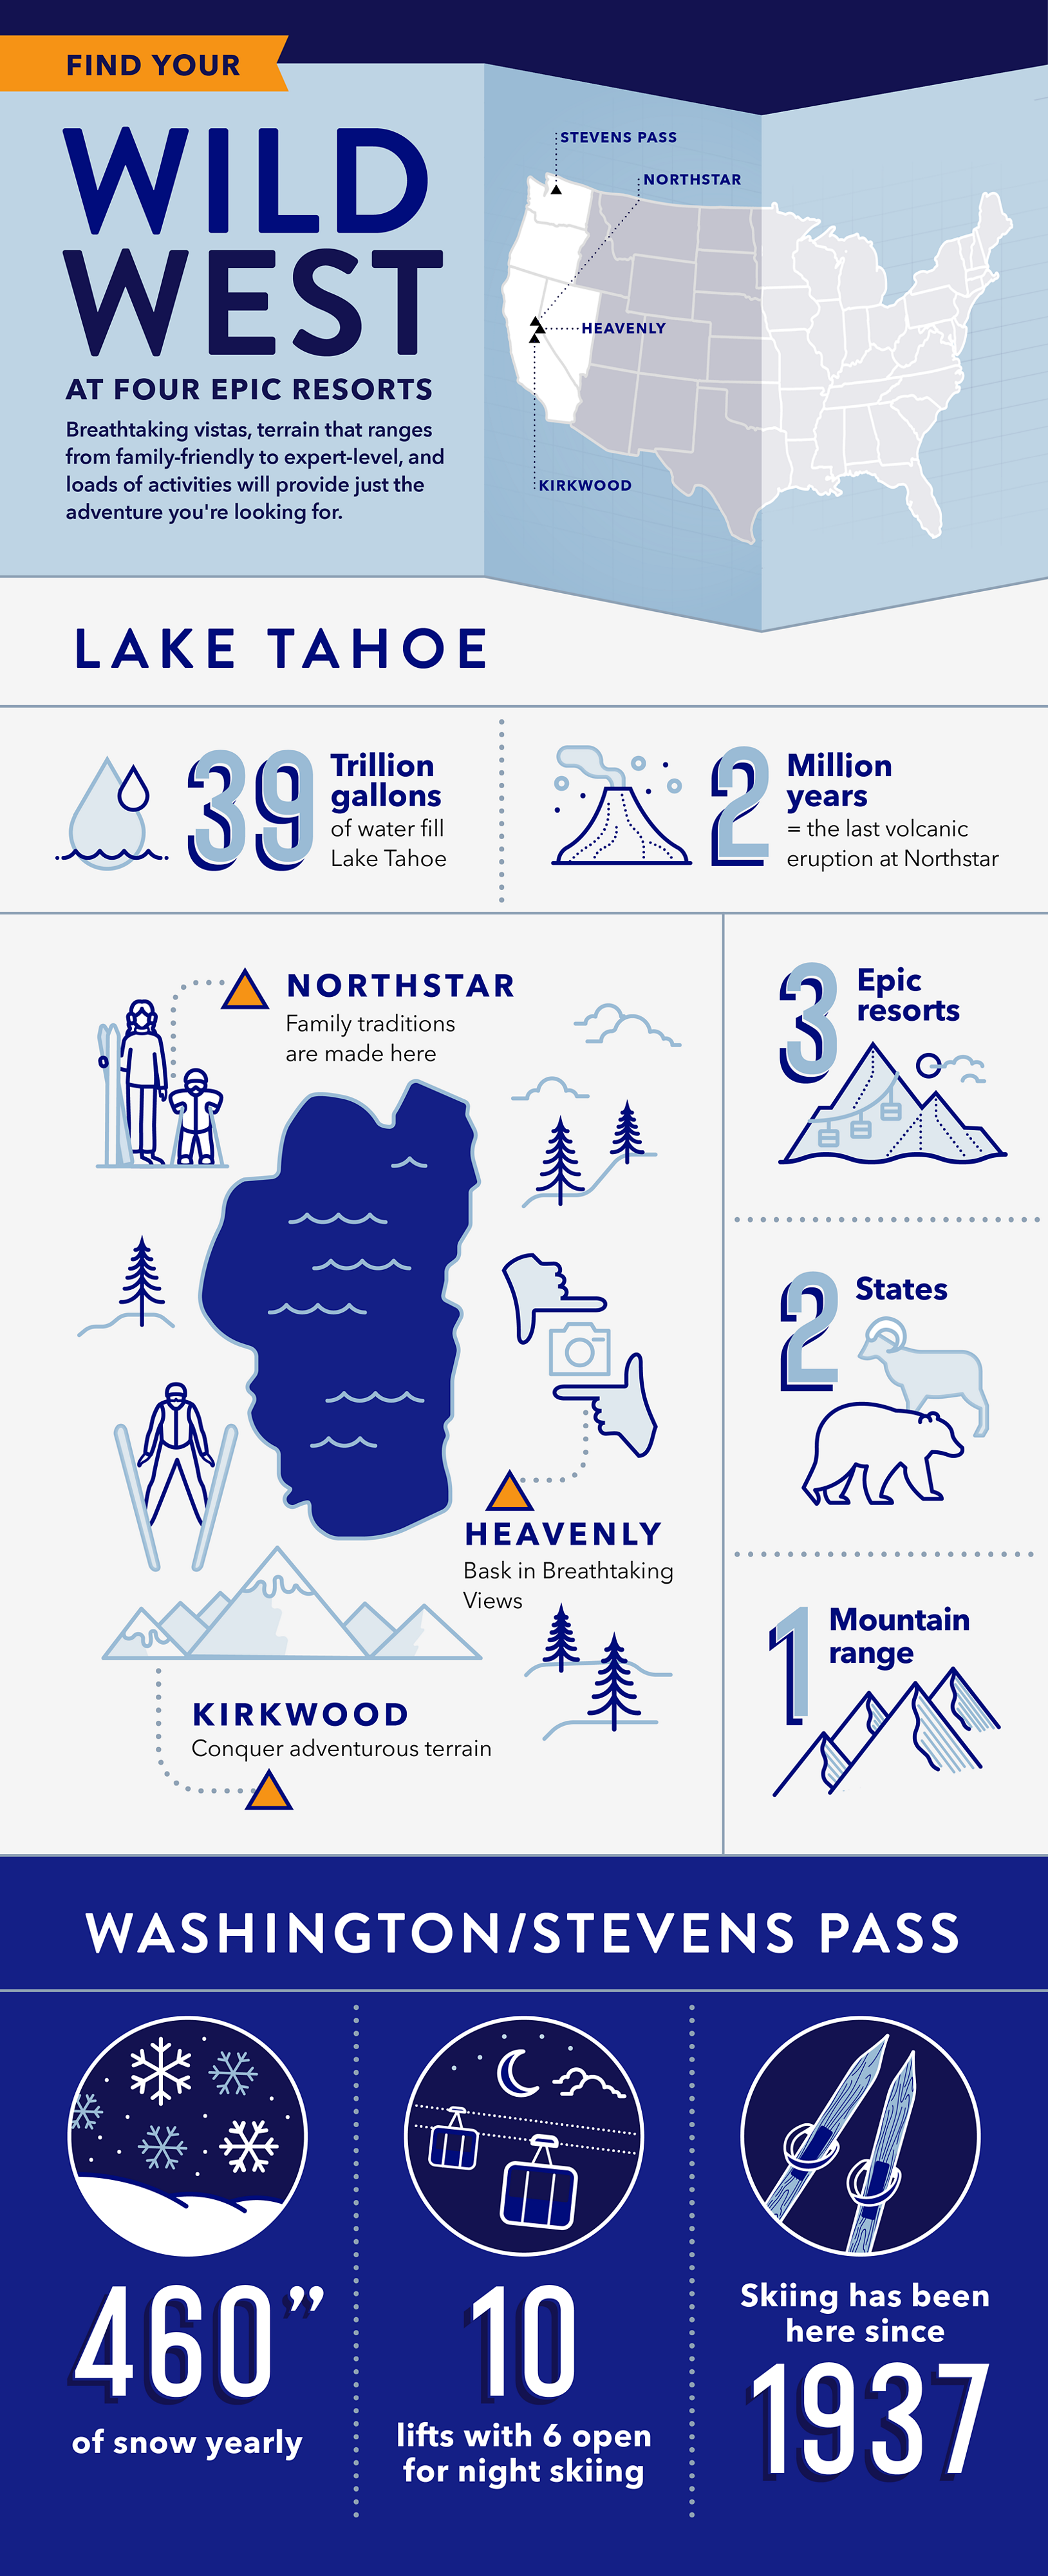 An infographic covering the facts of the protfolio of Vail's Resorts in the West including: 4 resorts across two states, an average of 460 inches of snowfall, and 6 night skiing lifts.